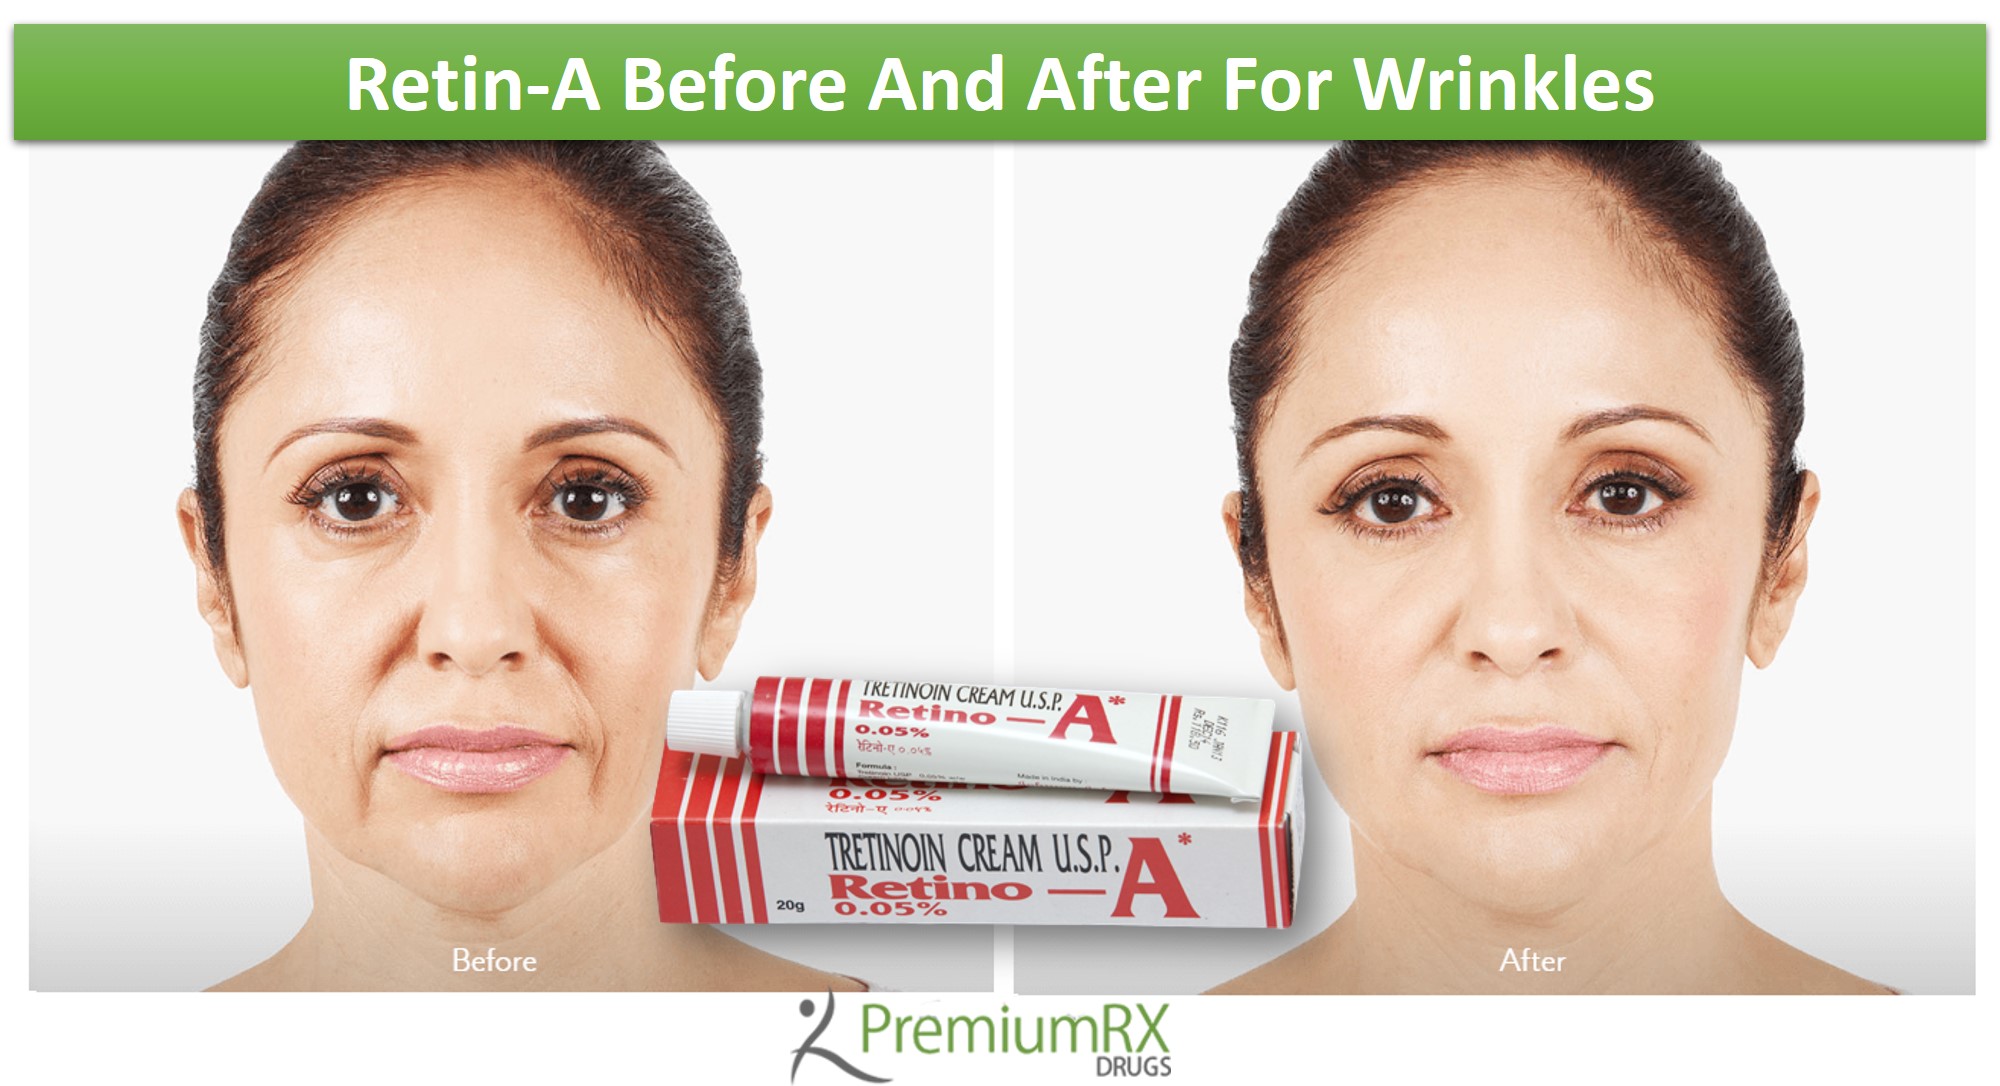 Retin-A Before And After For Wrinkles